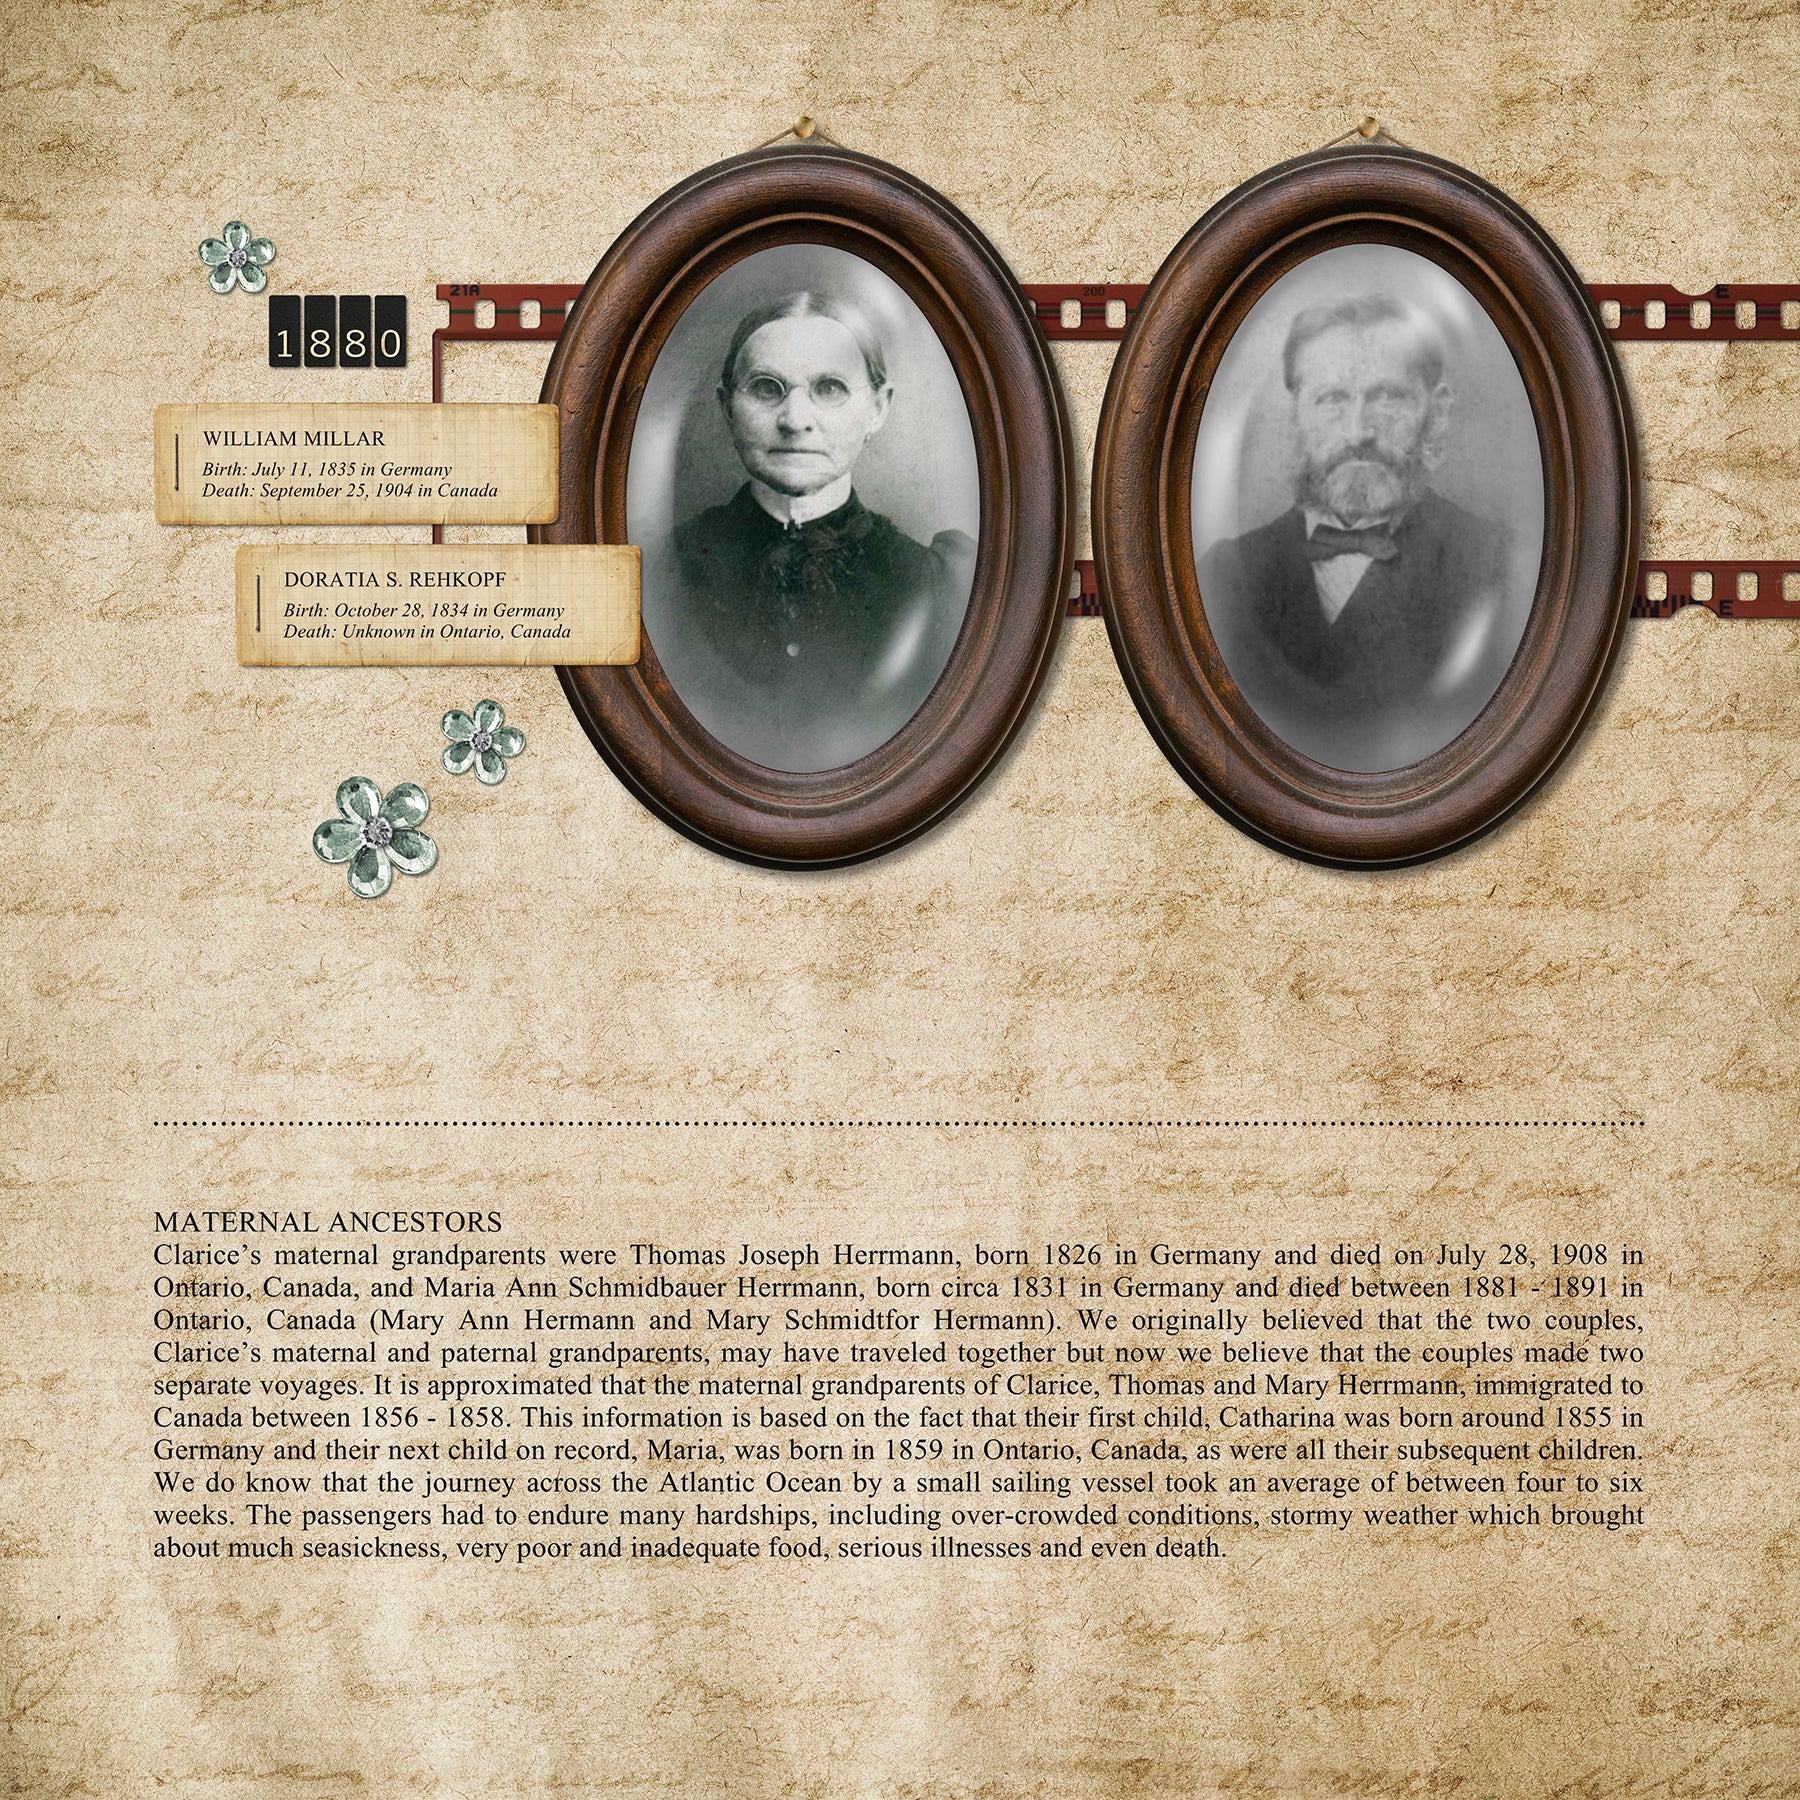 The Vintage Memories Frames 2 Digital Scrapbook Kit includes hanging, bowed glass digital art frames which are the perfect way to accent your vintage family history and genealogy projects. Wouldn't these frames look great as a family photo gallery page?! For additional embellishments, frames, and papers, look to the Vintage Memories collection for all coordinating kits.